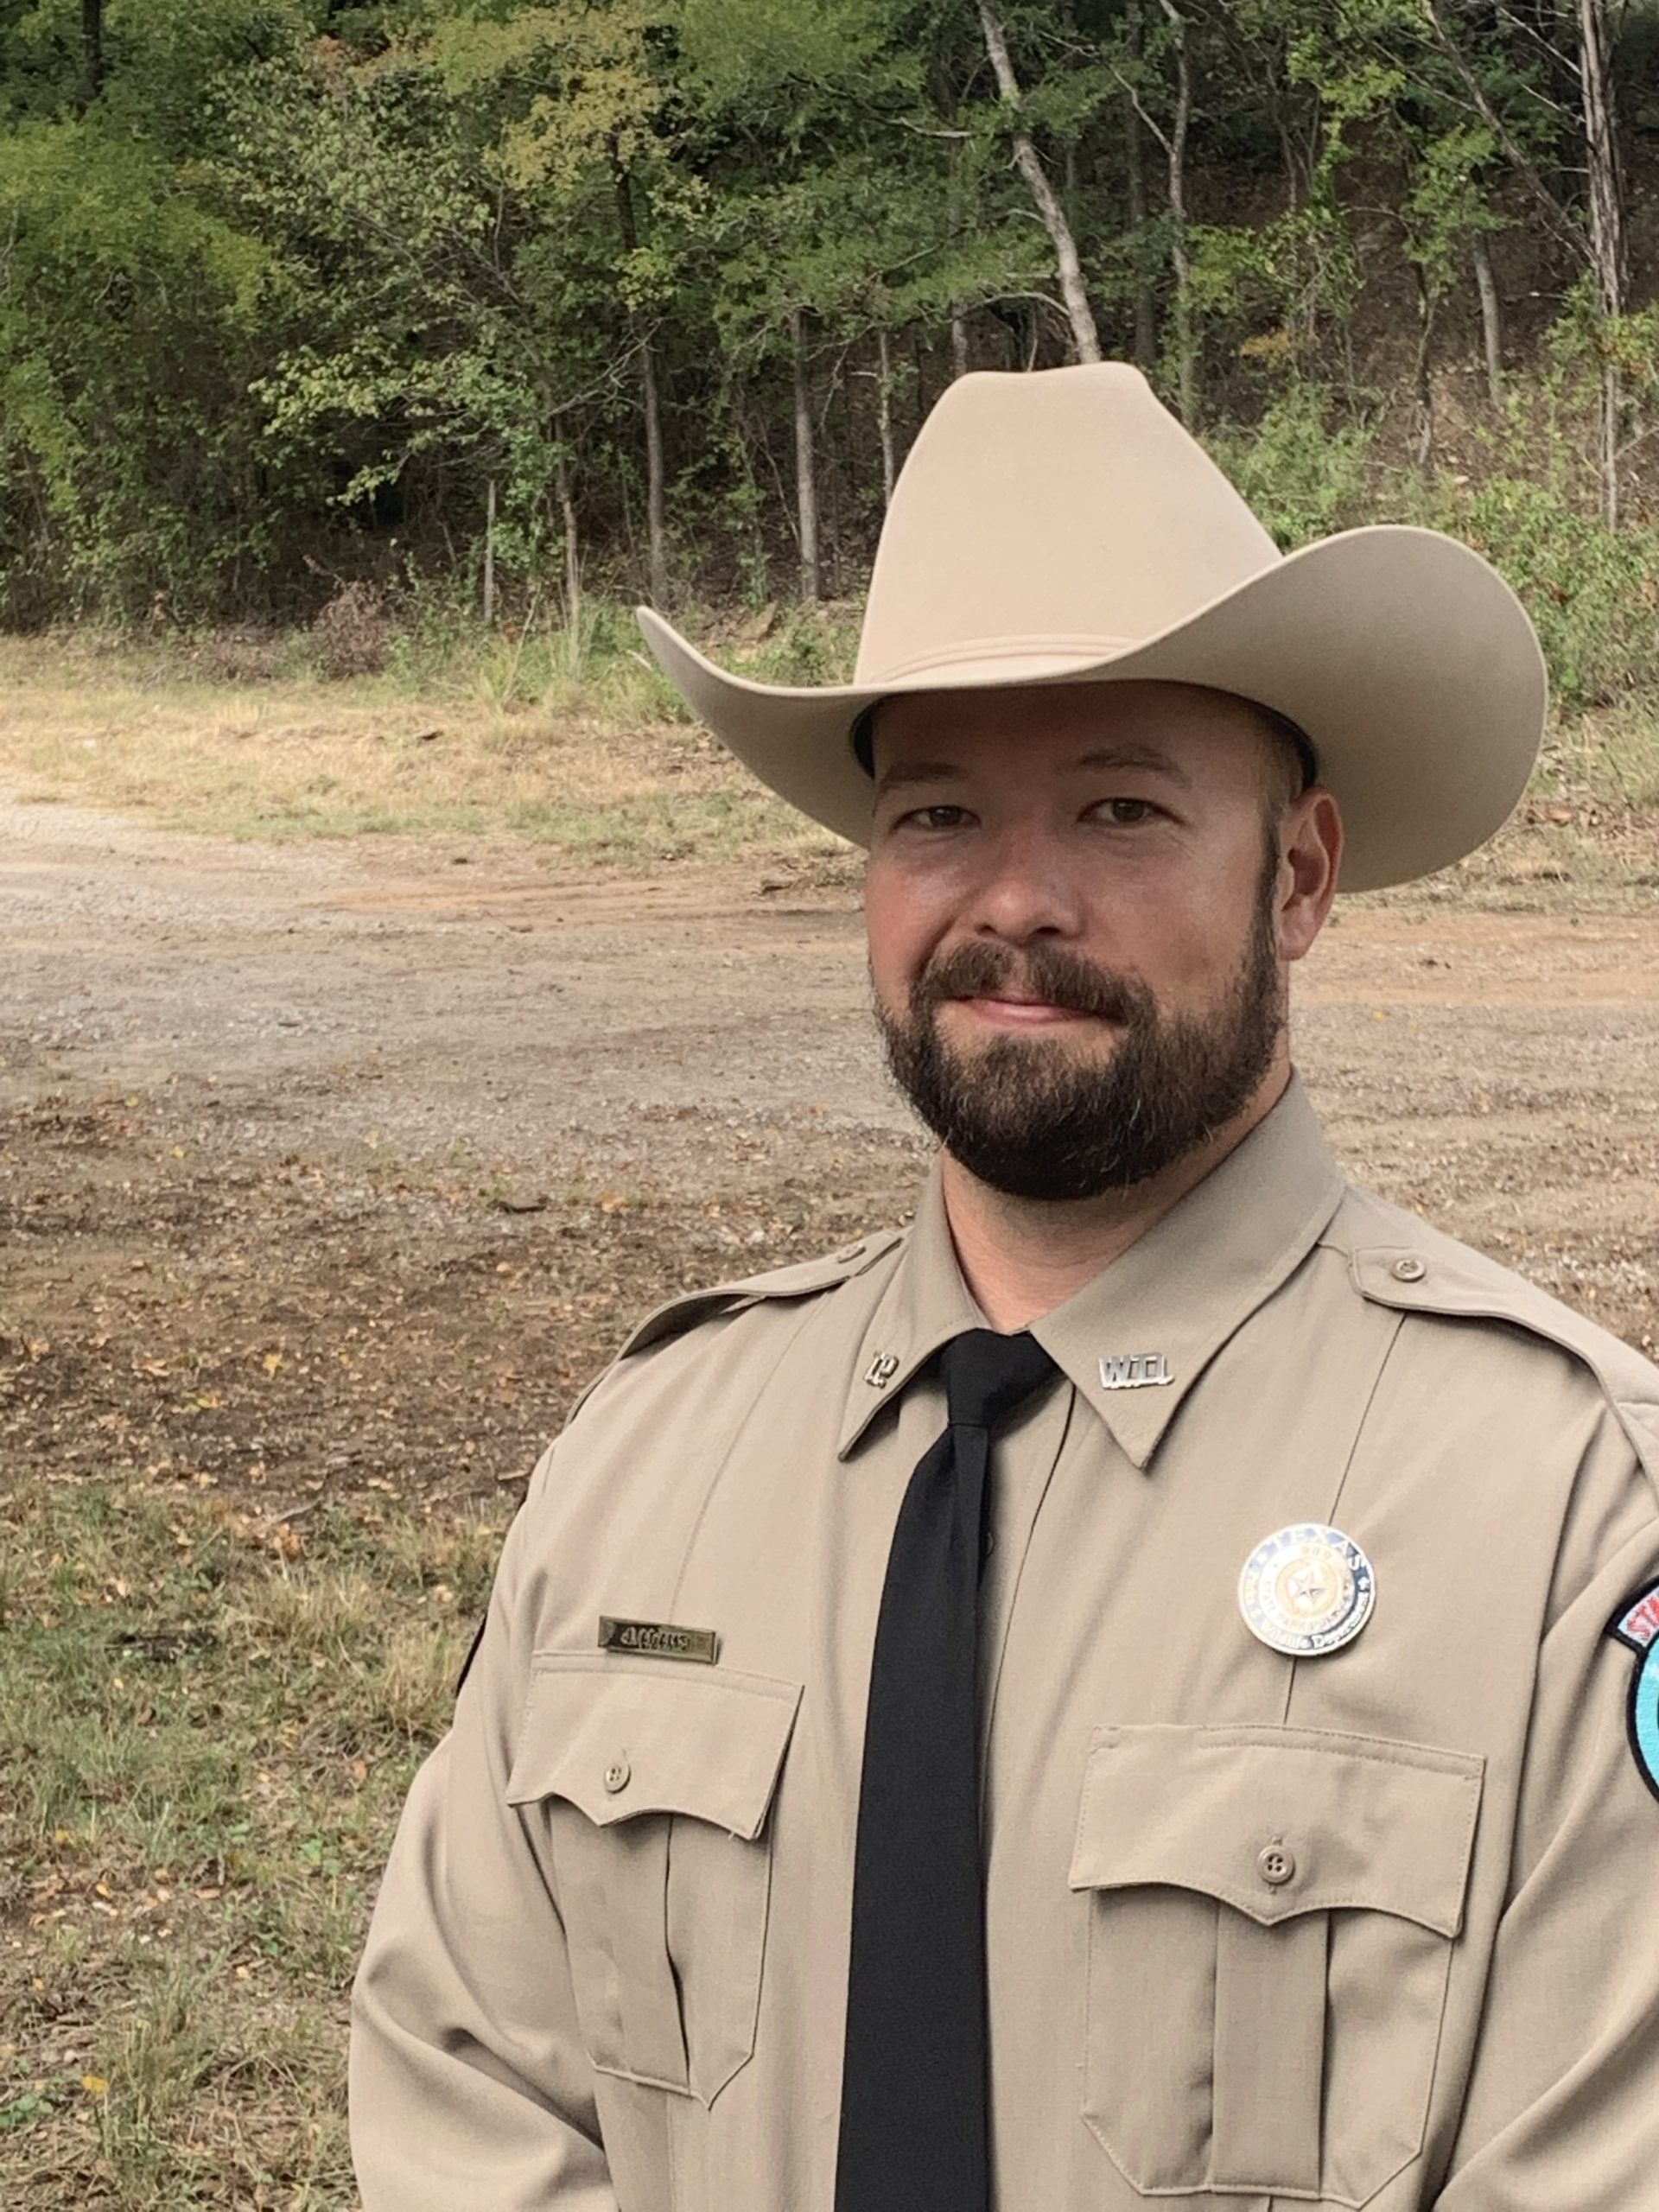 James Adams wears a cowboy hat and the khaki uniform of Texas Parks and Wildlife